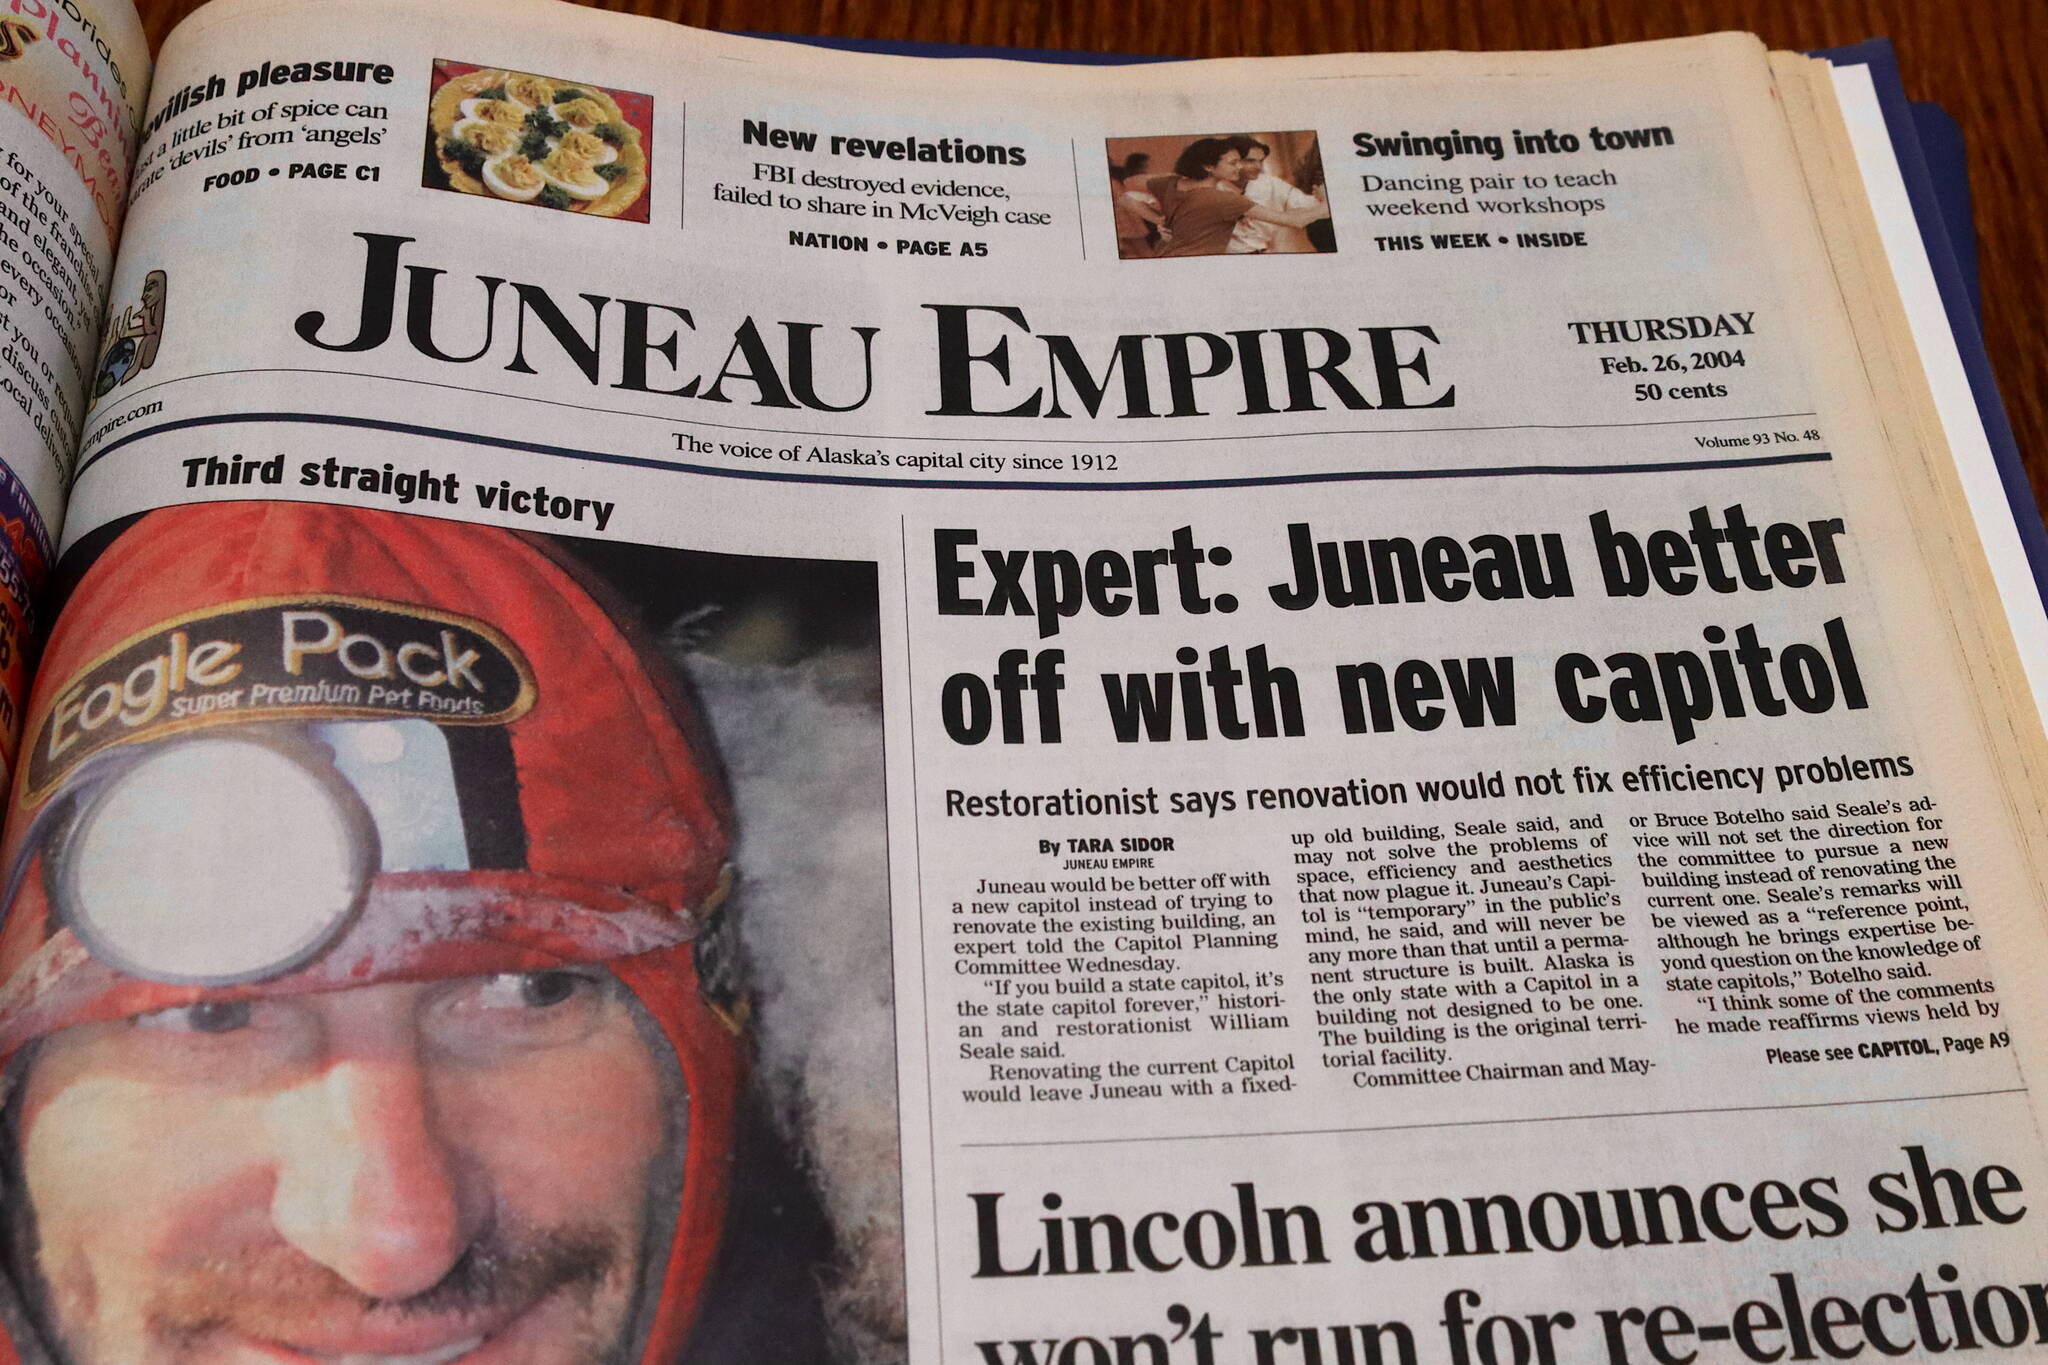 The front page of the Juneau Empire on Feb. 26, 2004. (Mark Sabbatini / Juneau Empire)